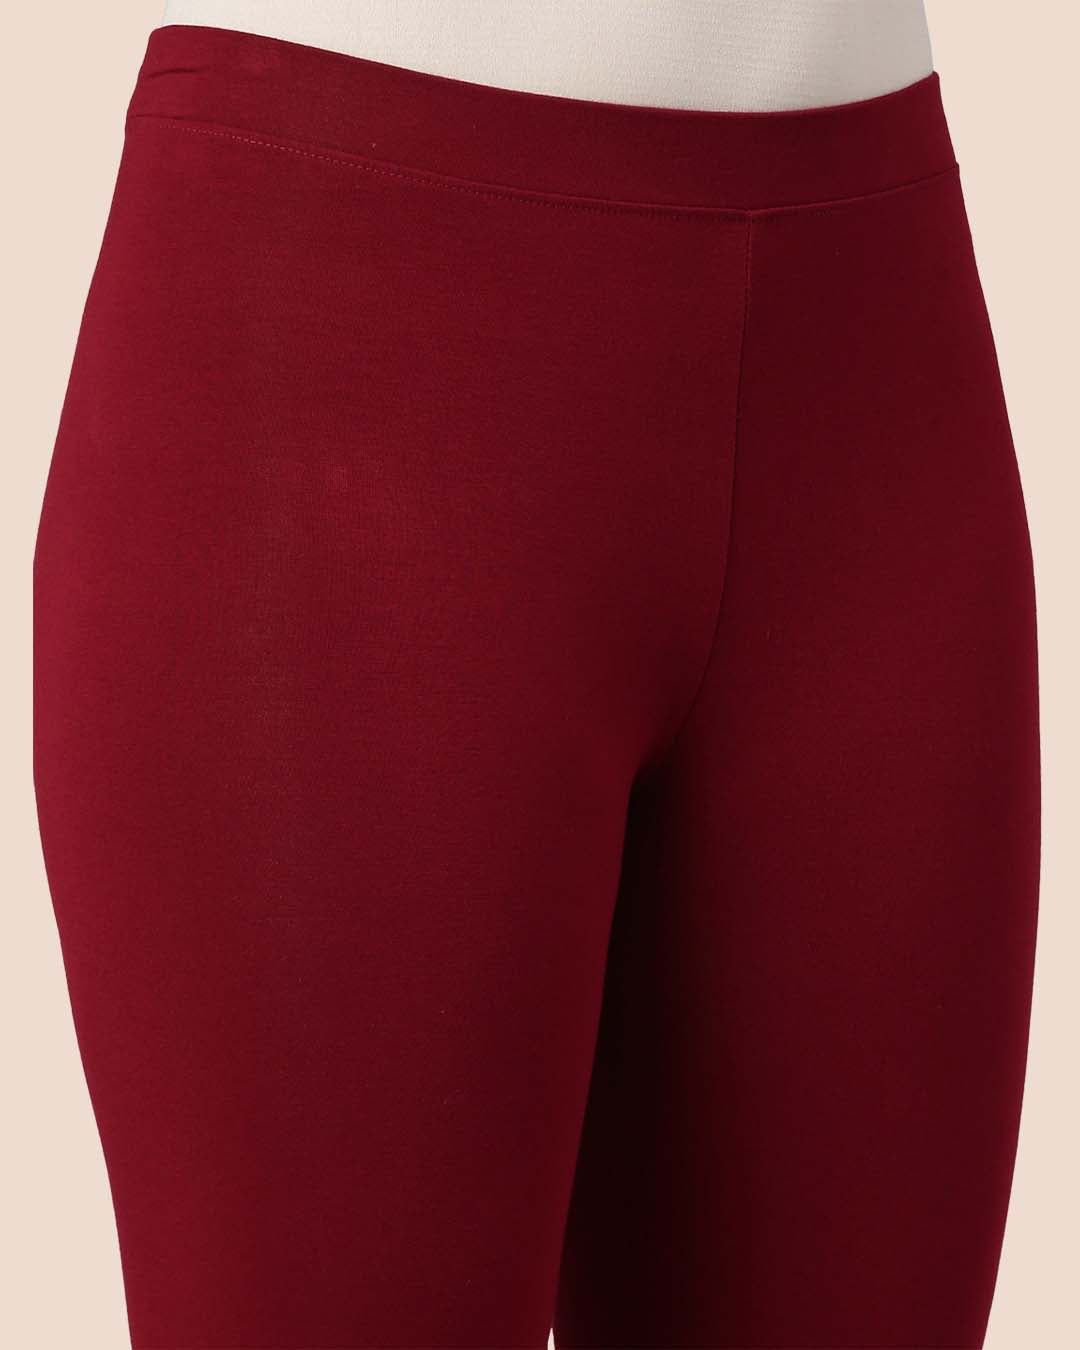 Stretchy Cherry Berry Women Viscose 7/8 High Ankle/Cropped Leggings